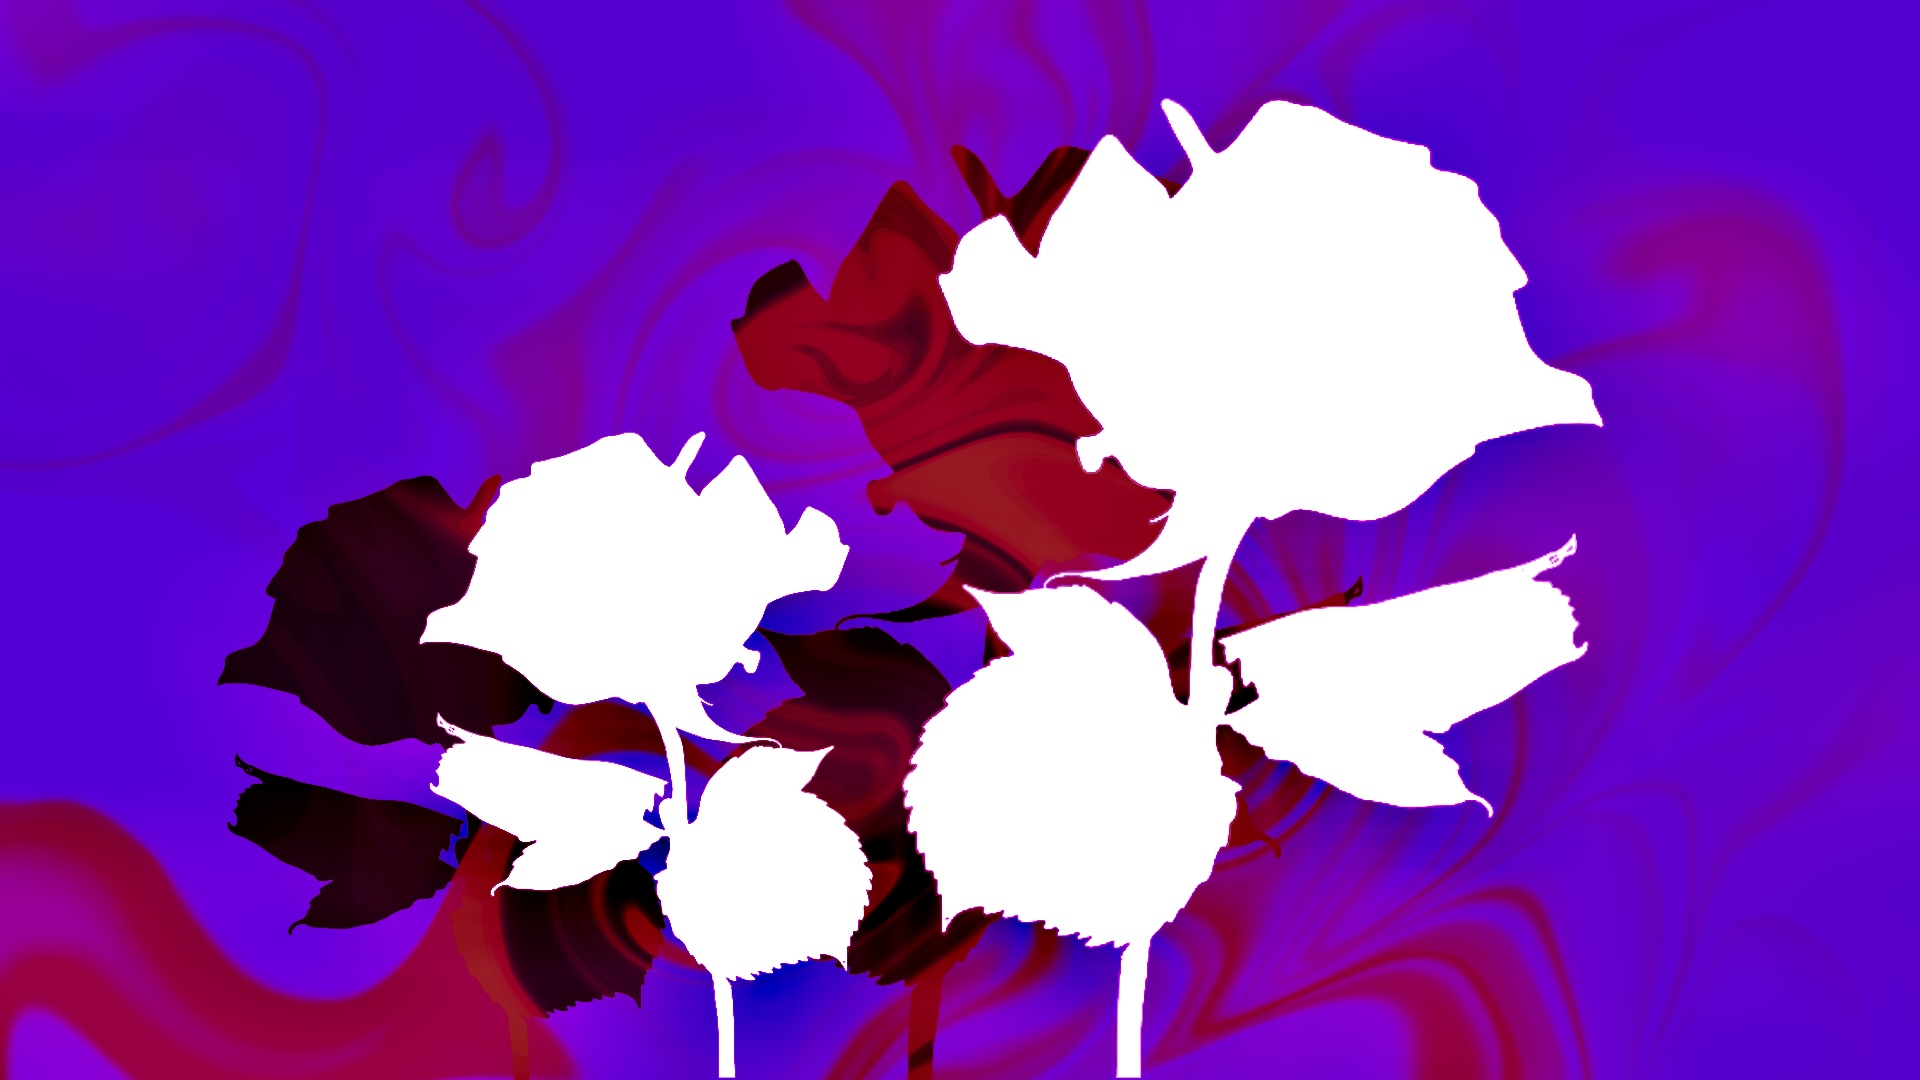 abstract image of roses